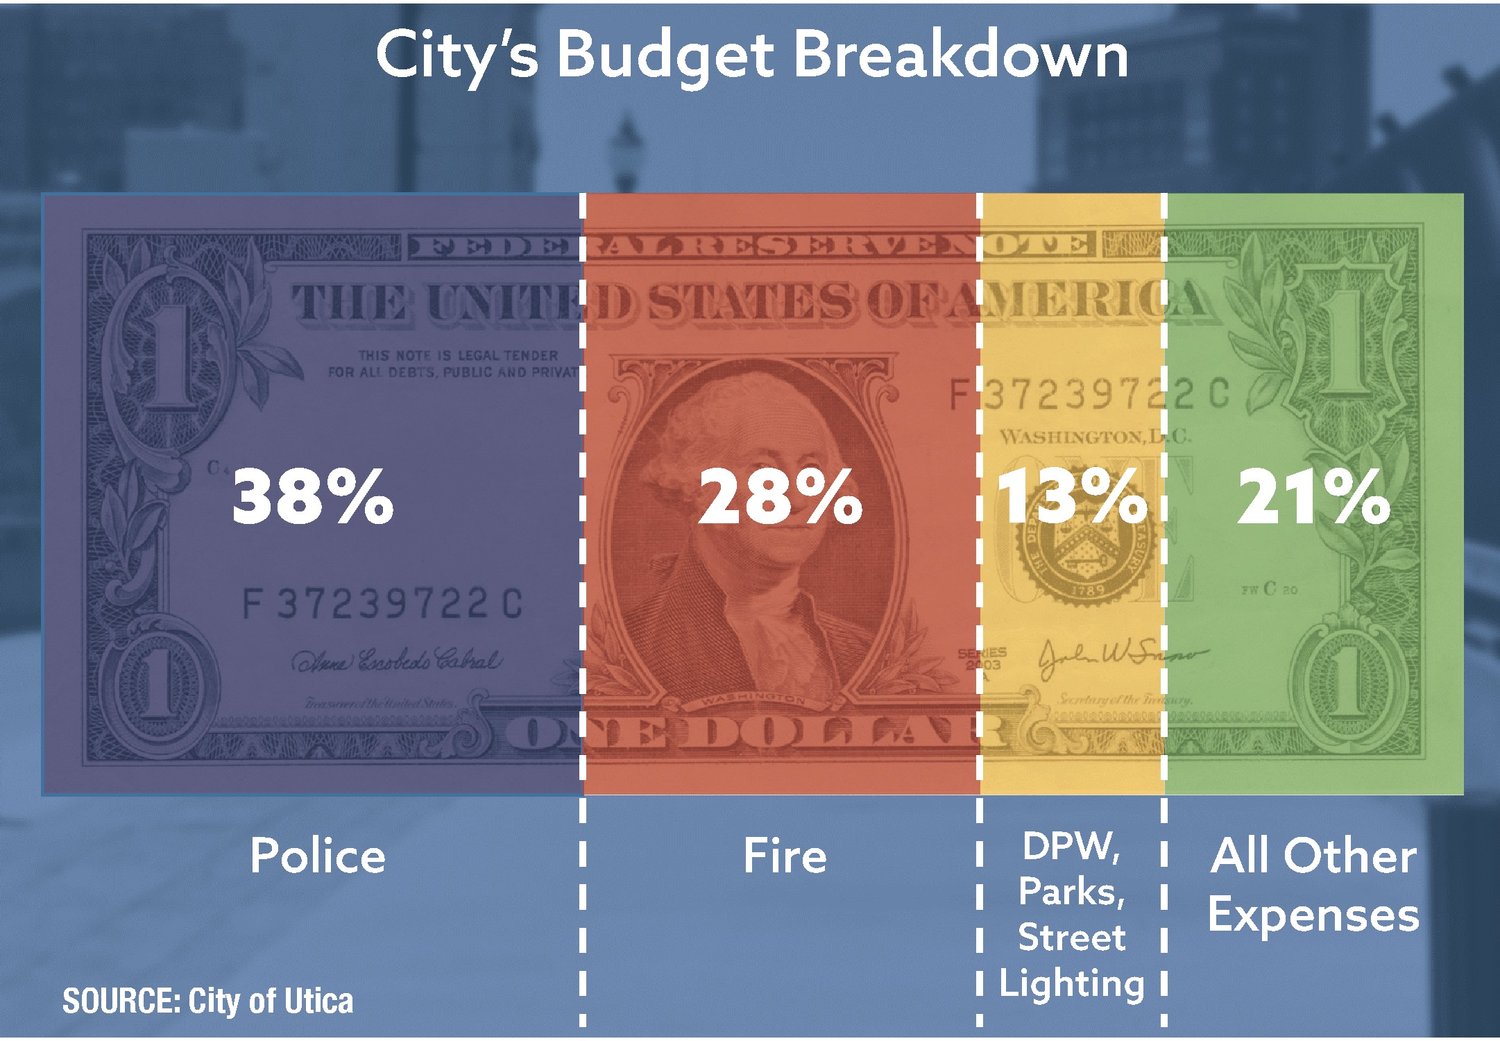 A breakdown of expenses and revenue portions in the proposed city budget.